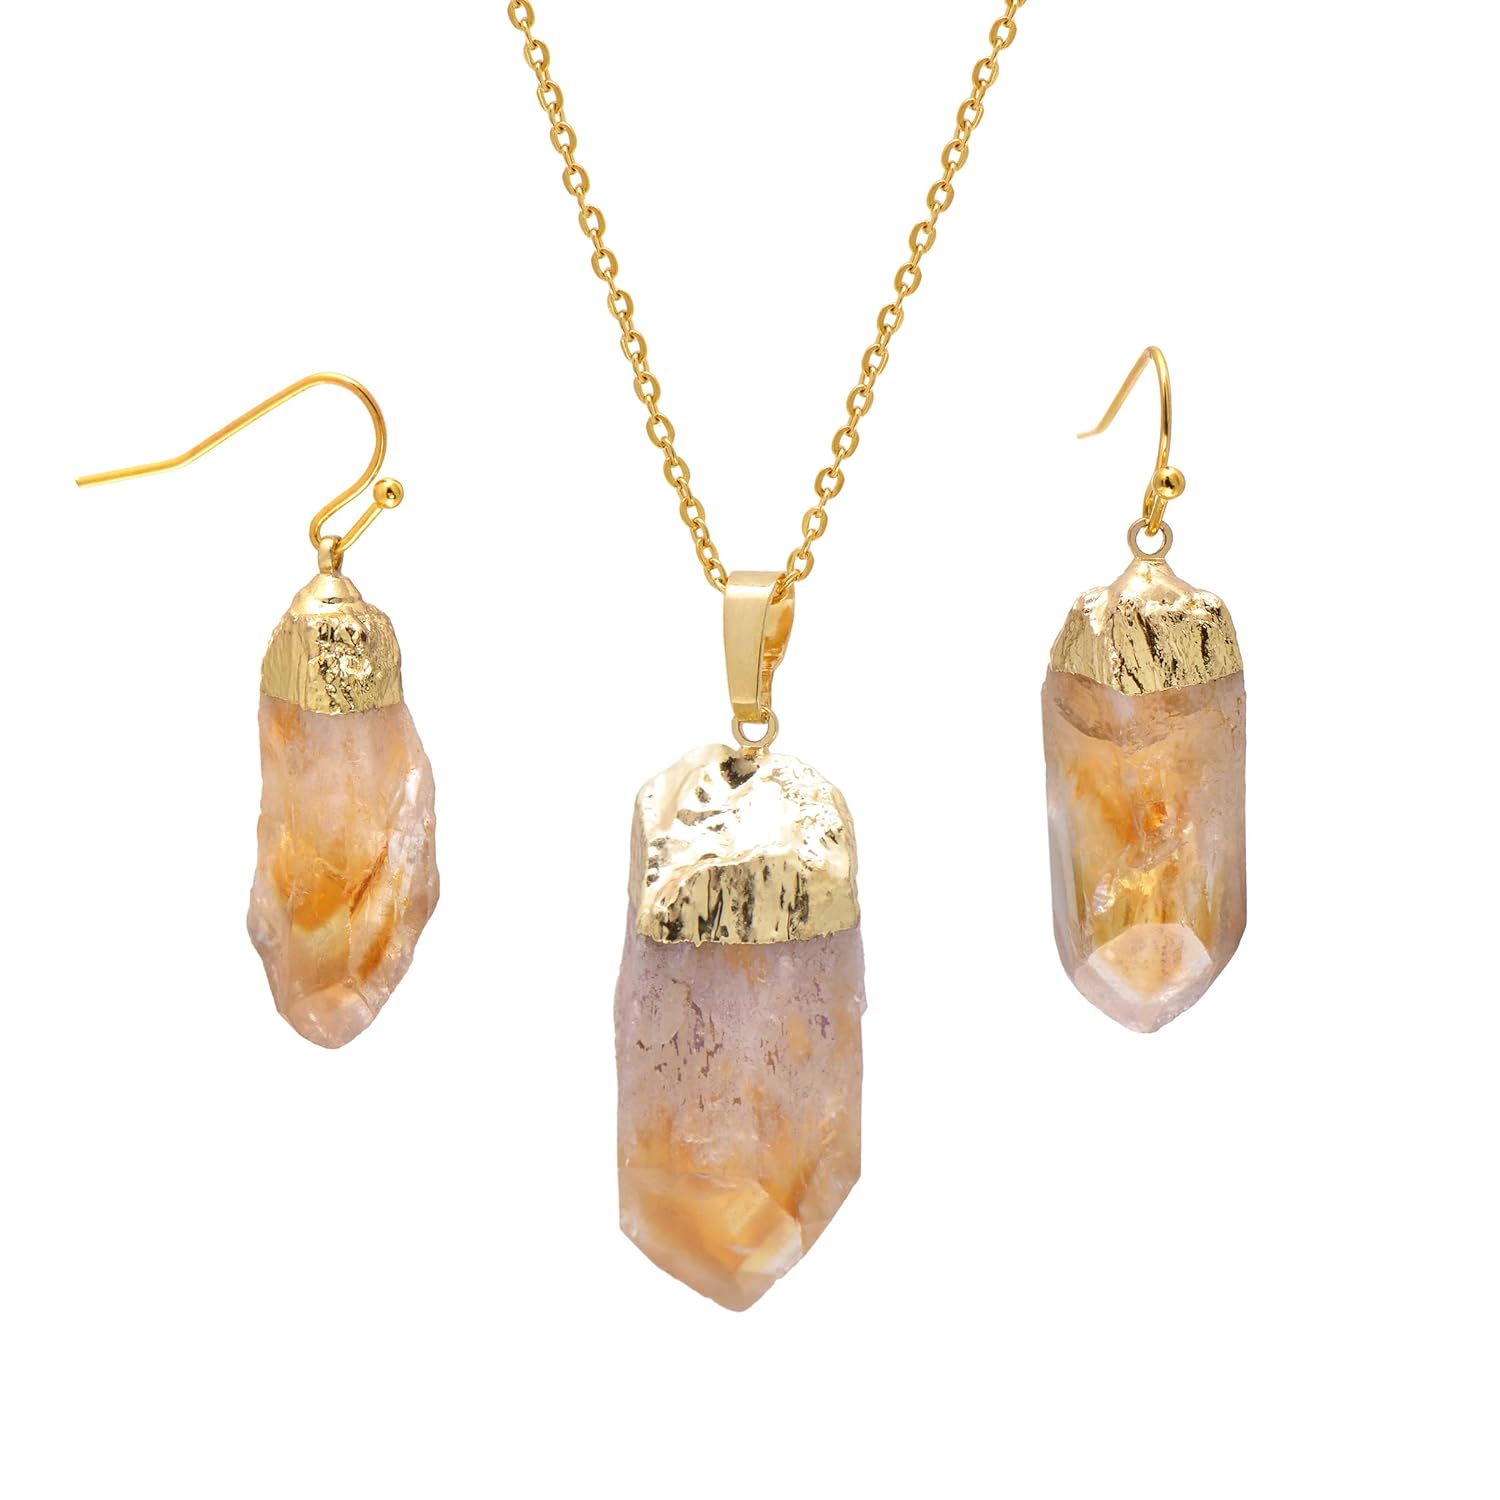 Natural Citrine Crystal Points Rough Stone Jewelry Set Earrings and Necklace, Yellow Gold Tone